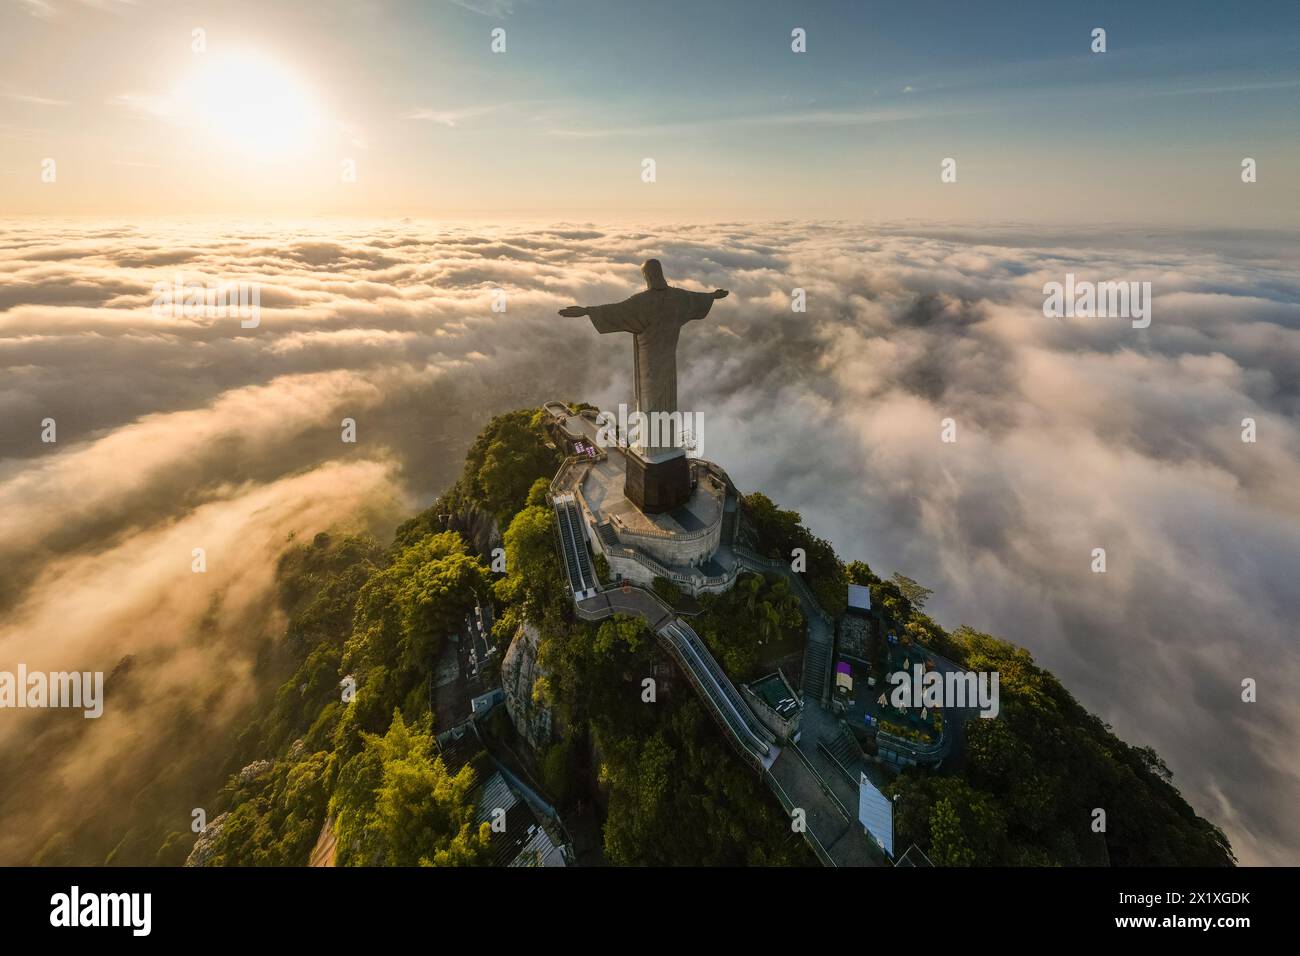 Rio de Janeiro, Brazil - April 11, 2024: Dramatic view of Christ the Redeemer statue on top of the Corcovado mountain above clouds during sunrise. Stock Photo